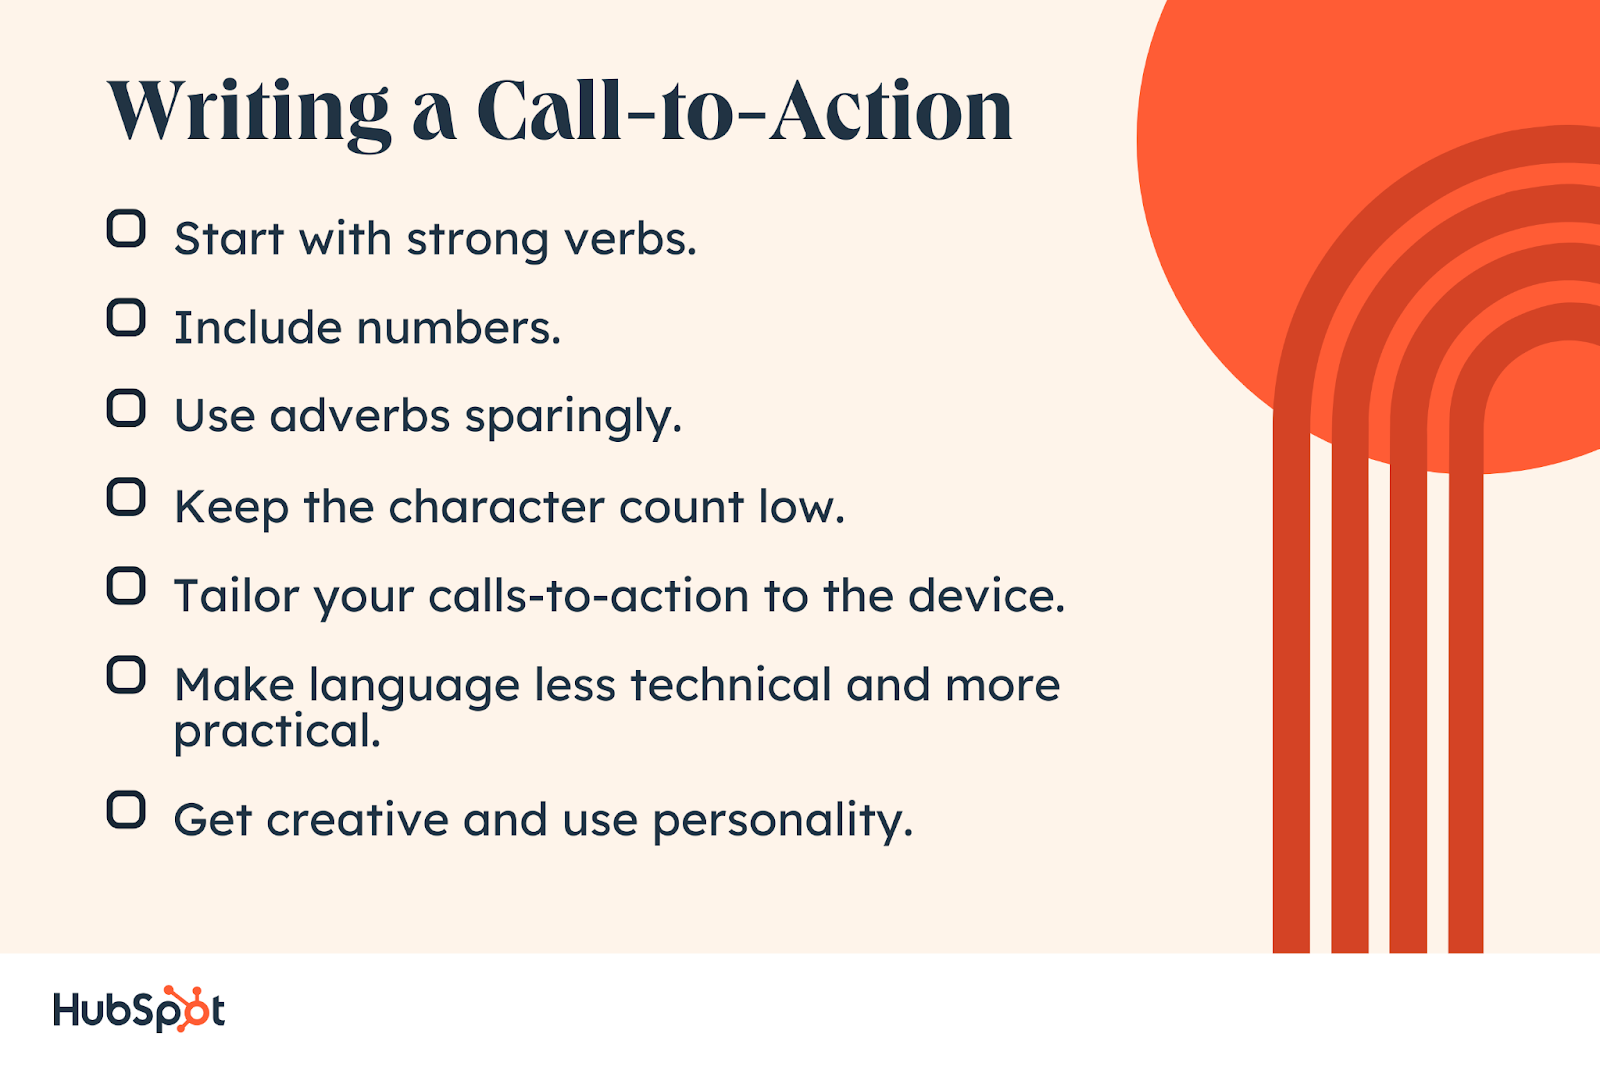 Writing a Call-to-Action. Include numbers. Tailor your calls-to-action to the device. Use adverbs sparingly. Keep the character count low. Make language less technical and more practical. Get creative and use personality. Start with strong verbs.